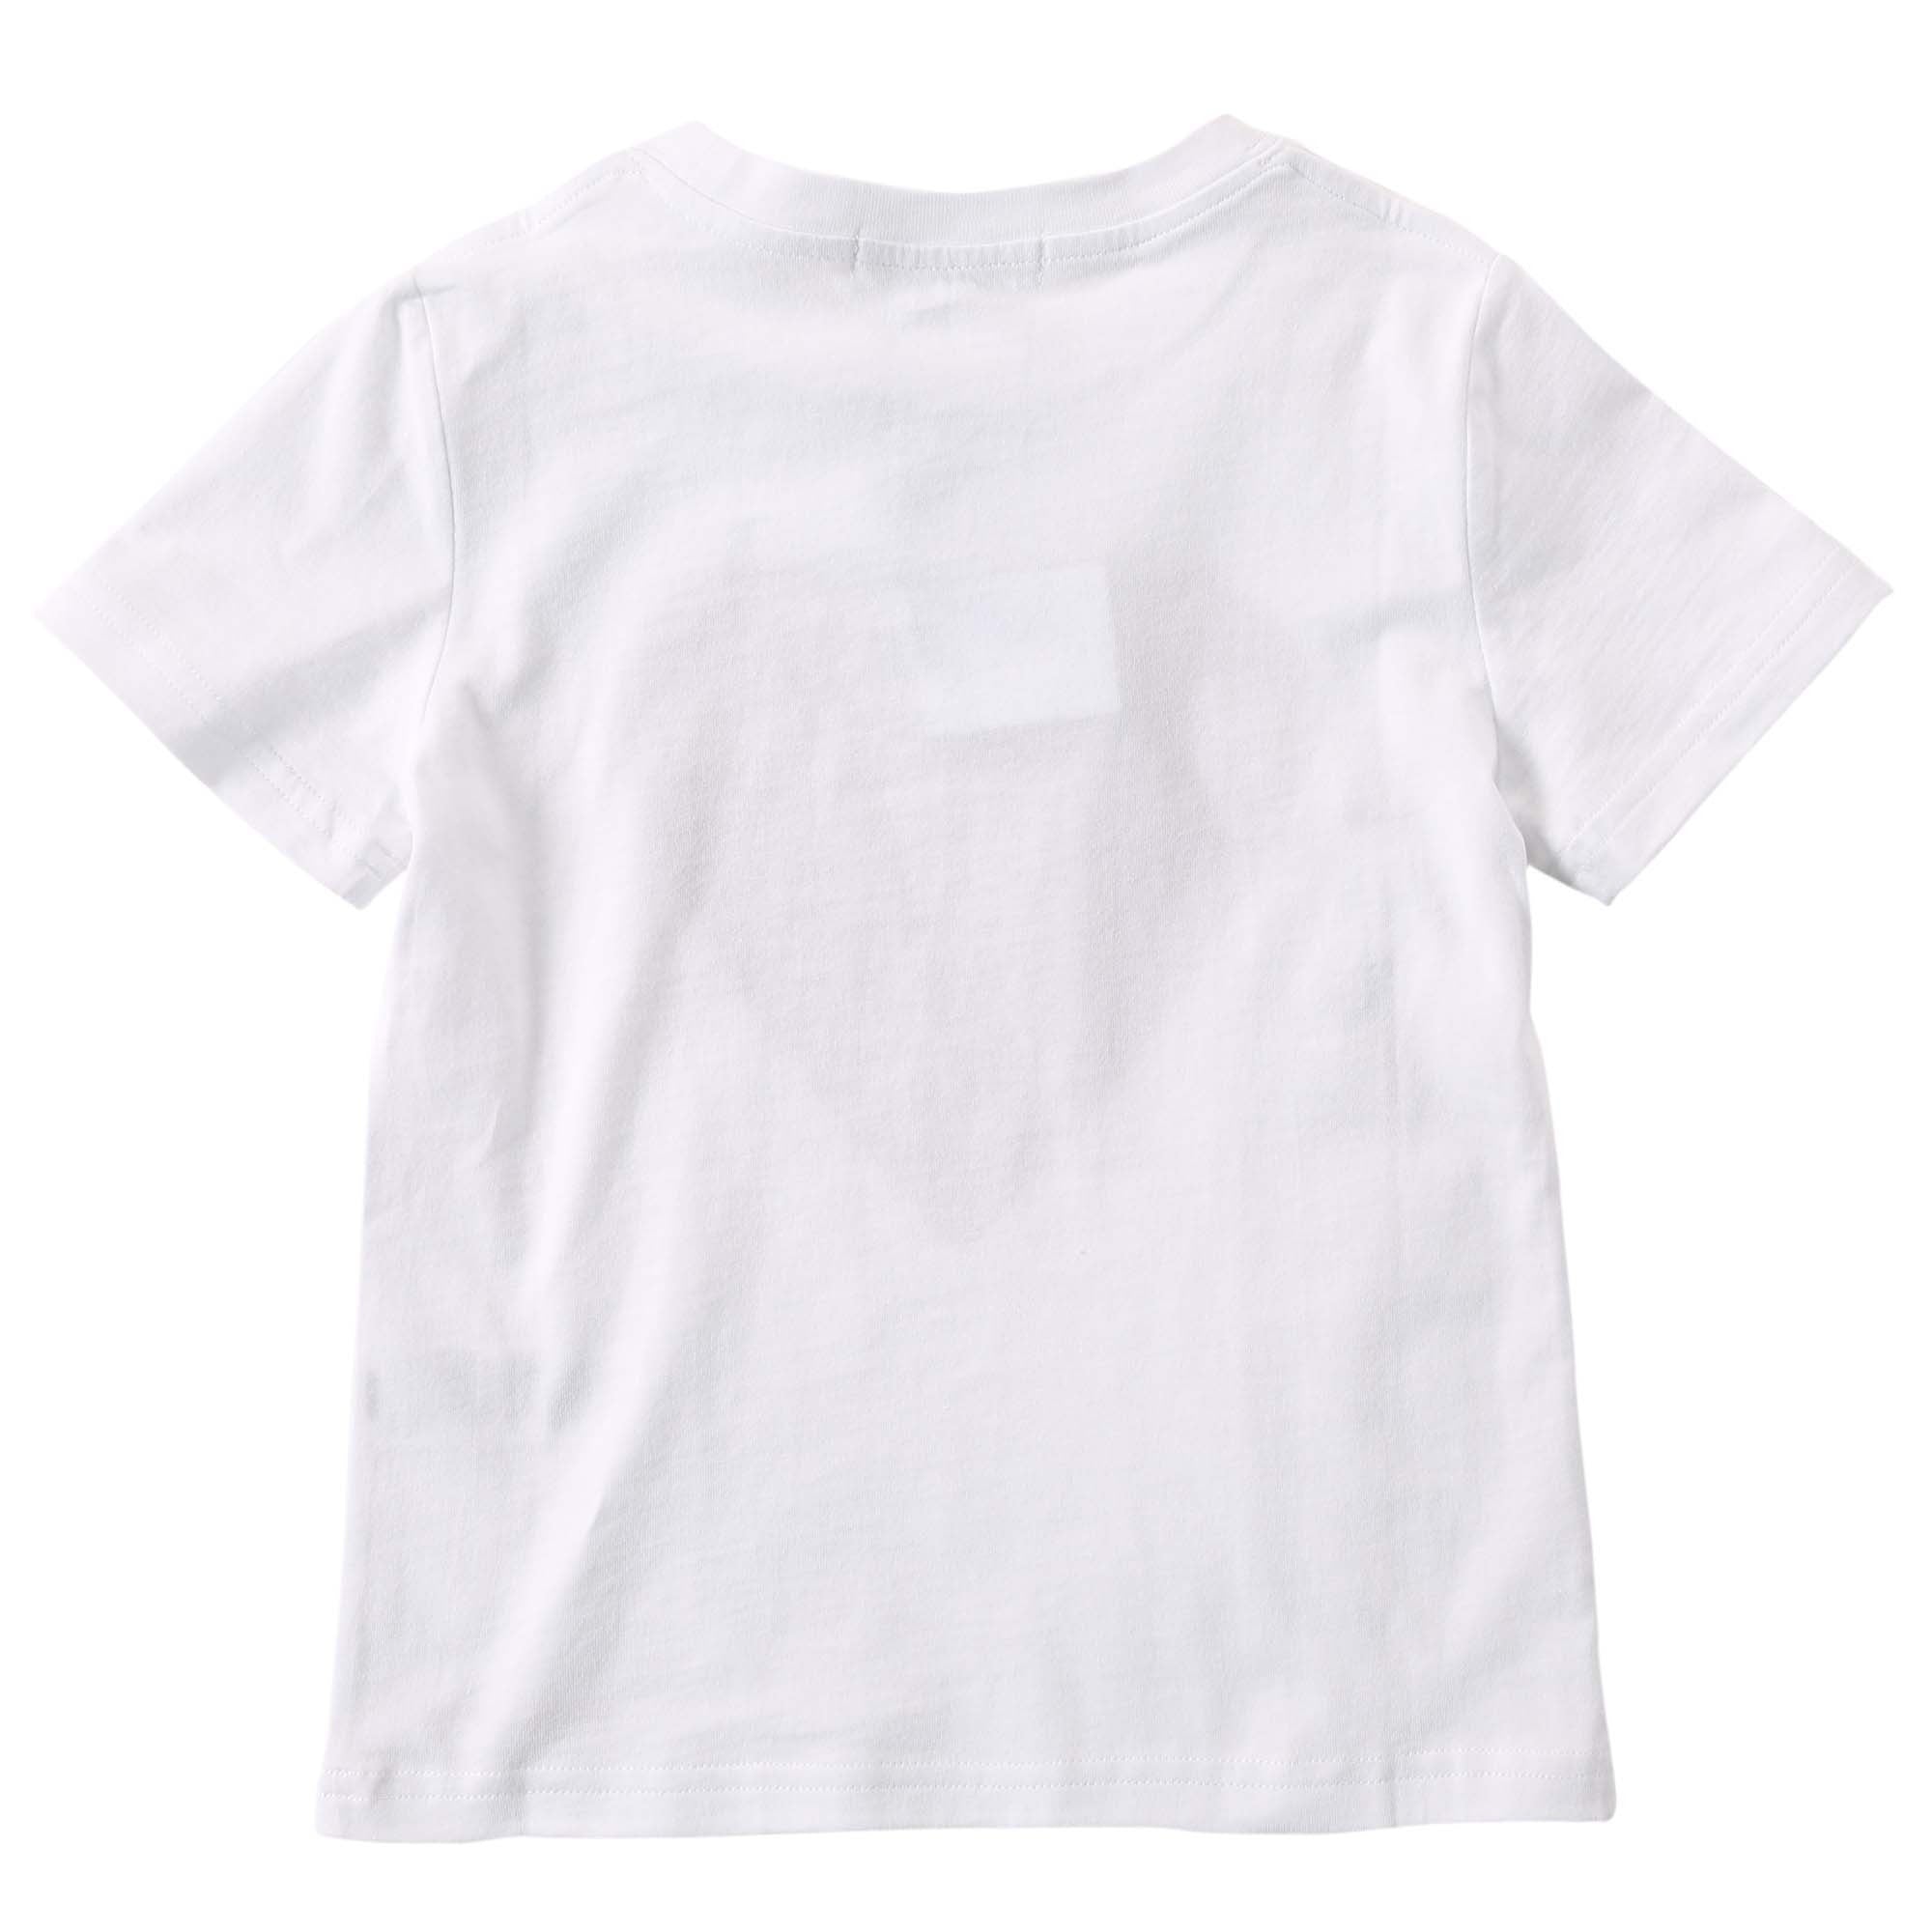 Girls White Cotton T-Shirt With Red Heart Trims - CÉMAROSE | Children's Fashion Store - 2